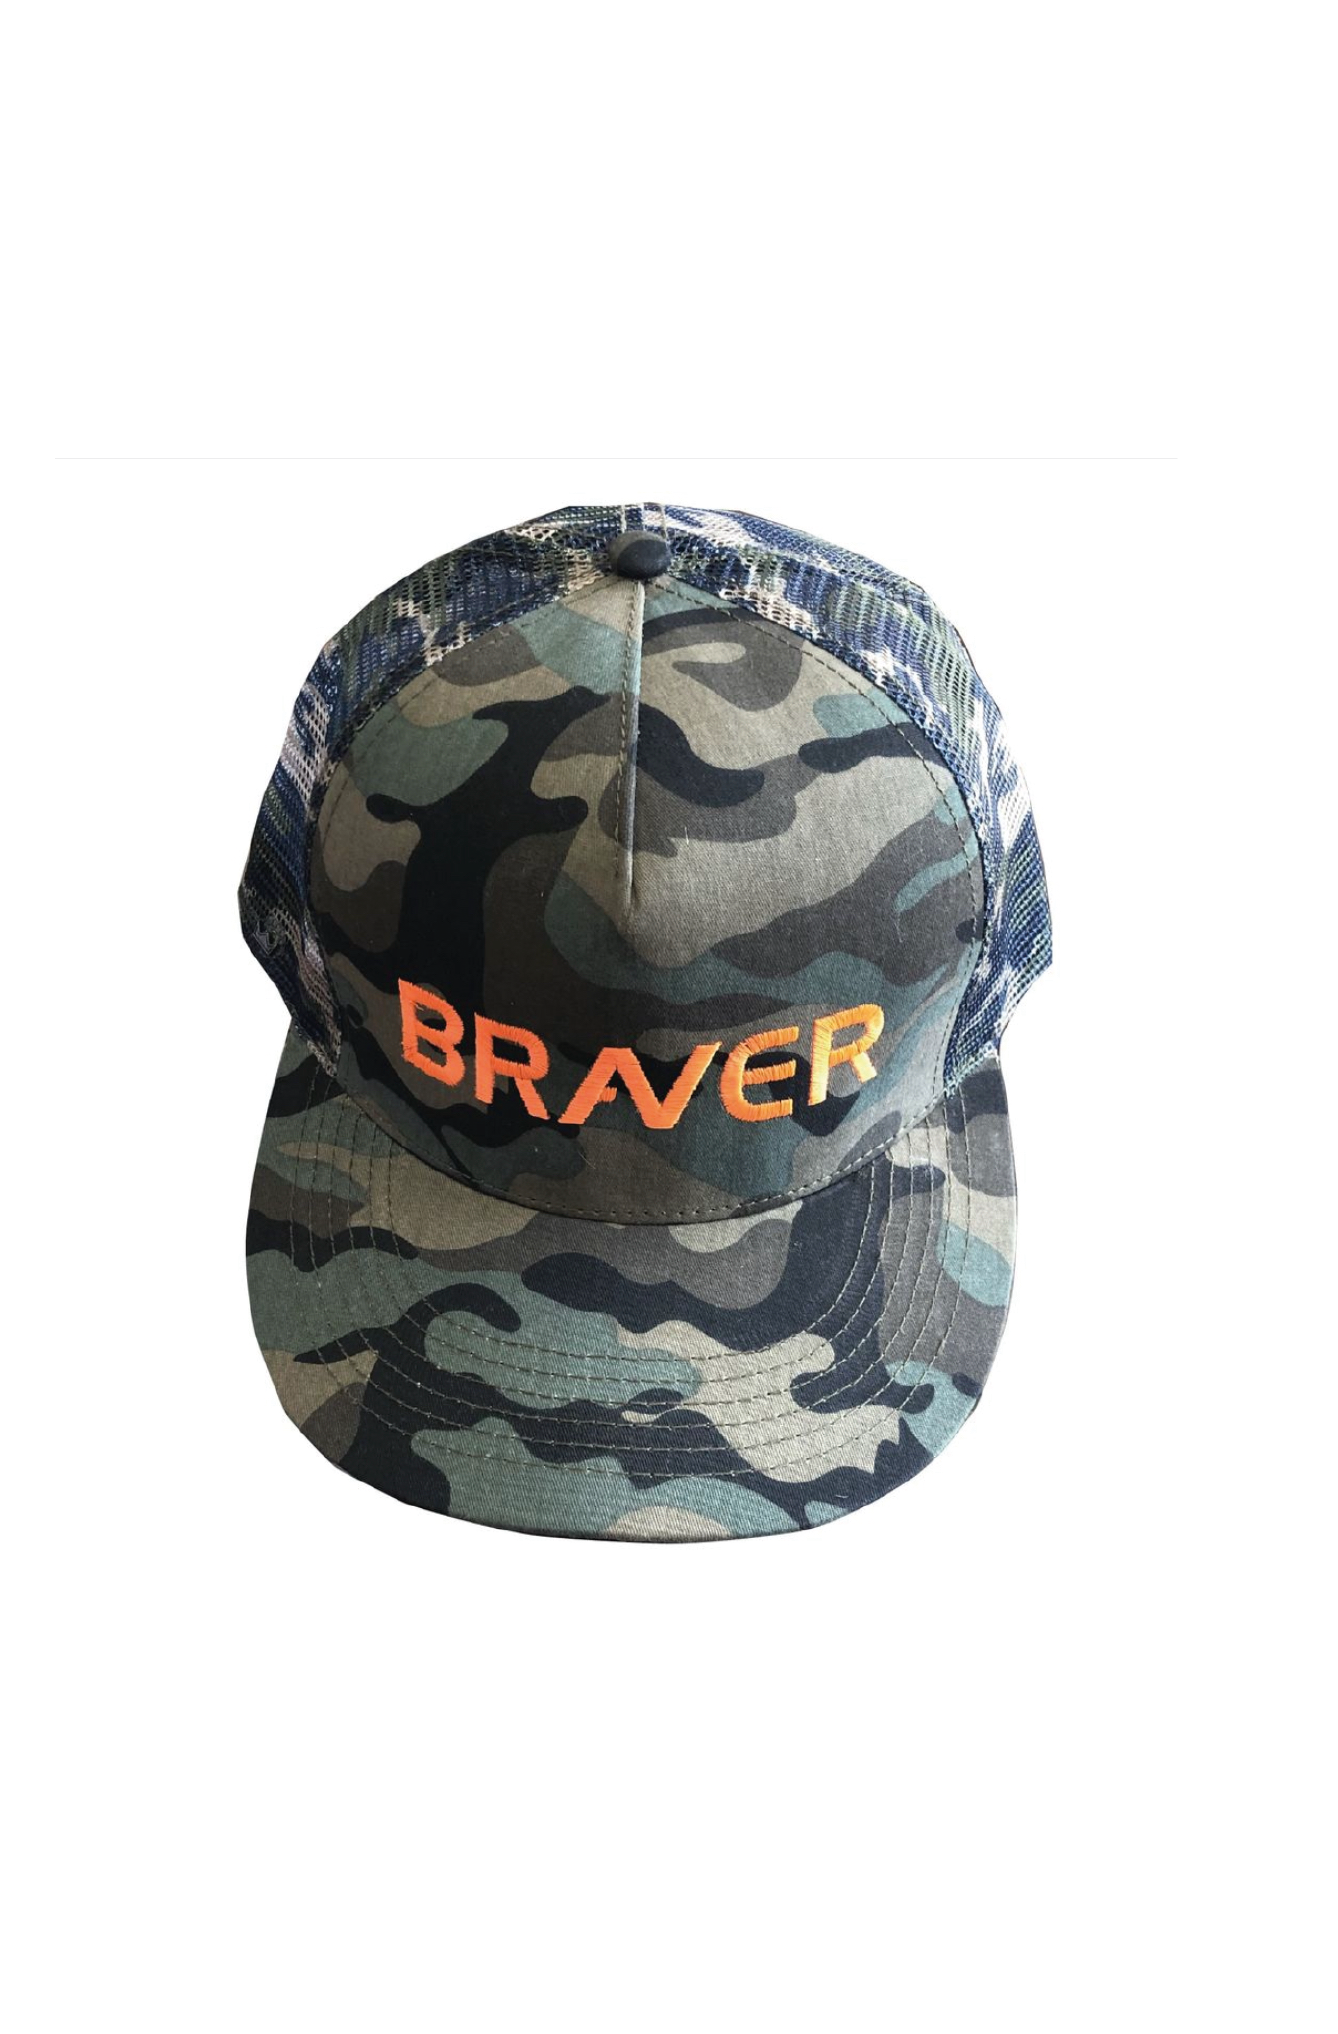 Camo flat peak cap with BRAVER text on in orange embroidery 